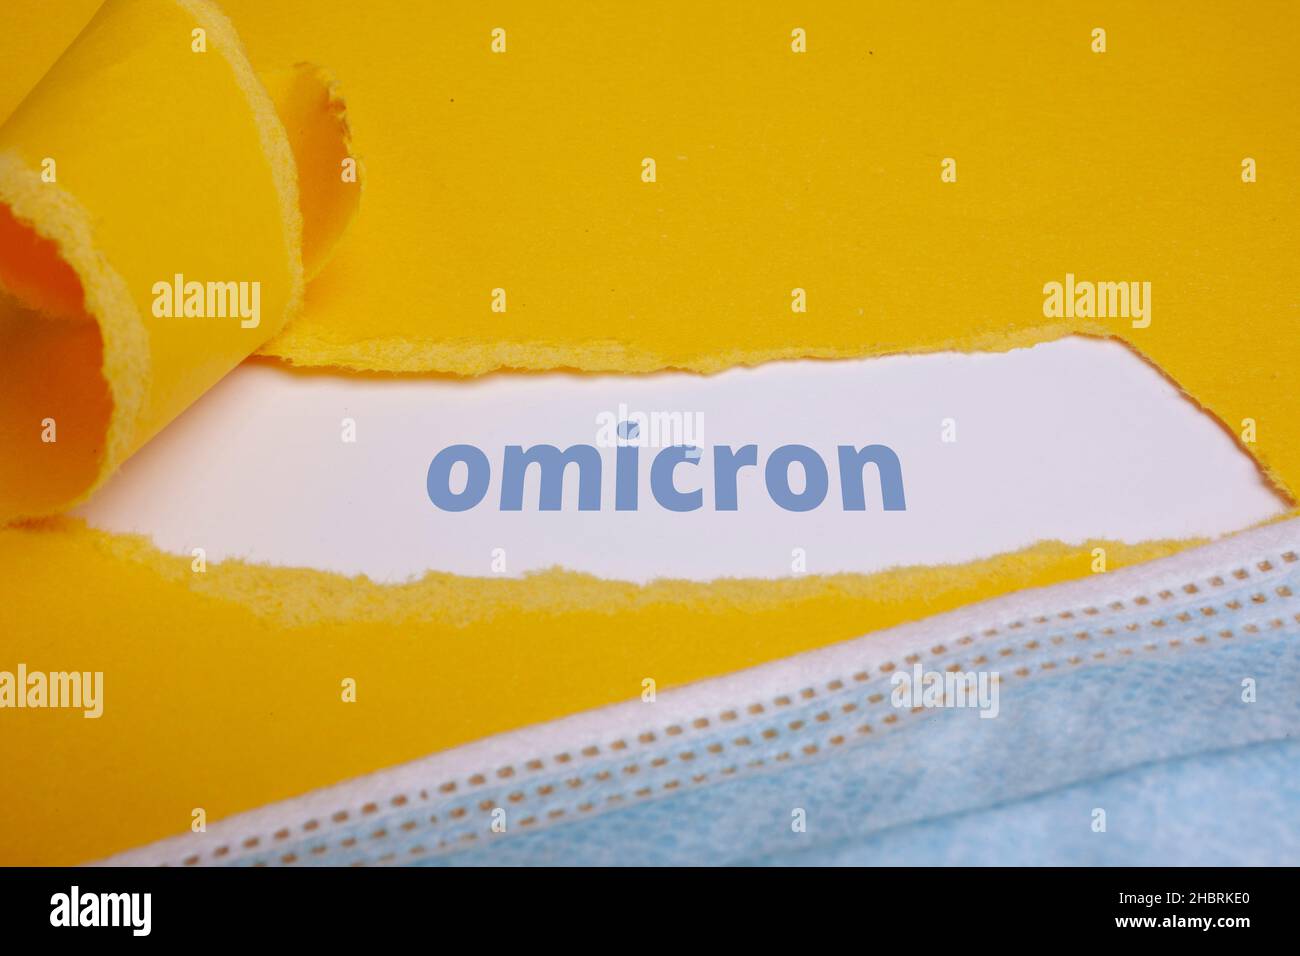 omicron torn Paper Concept Stock Photo